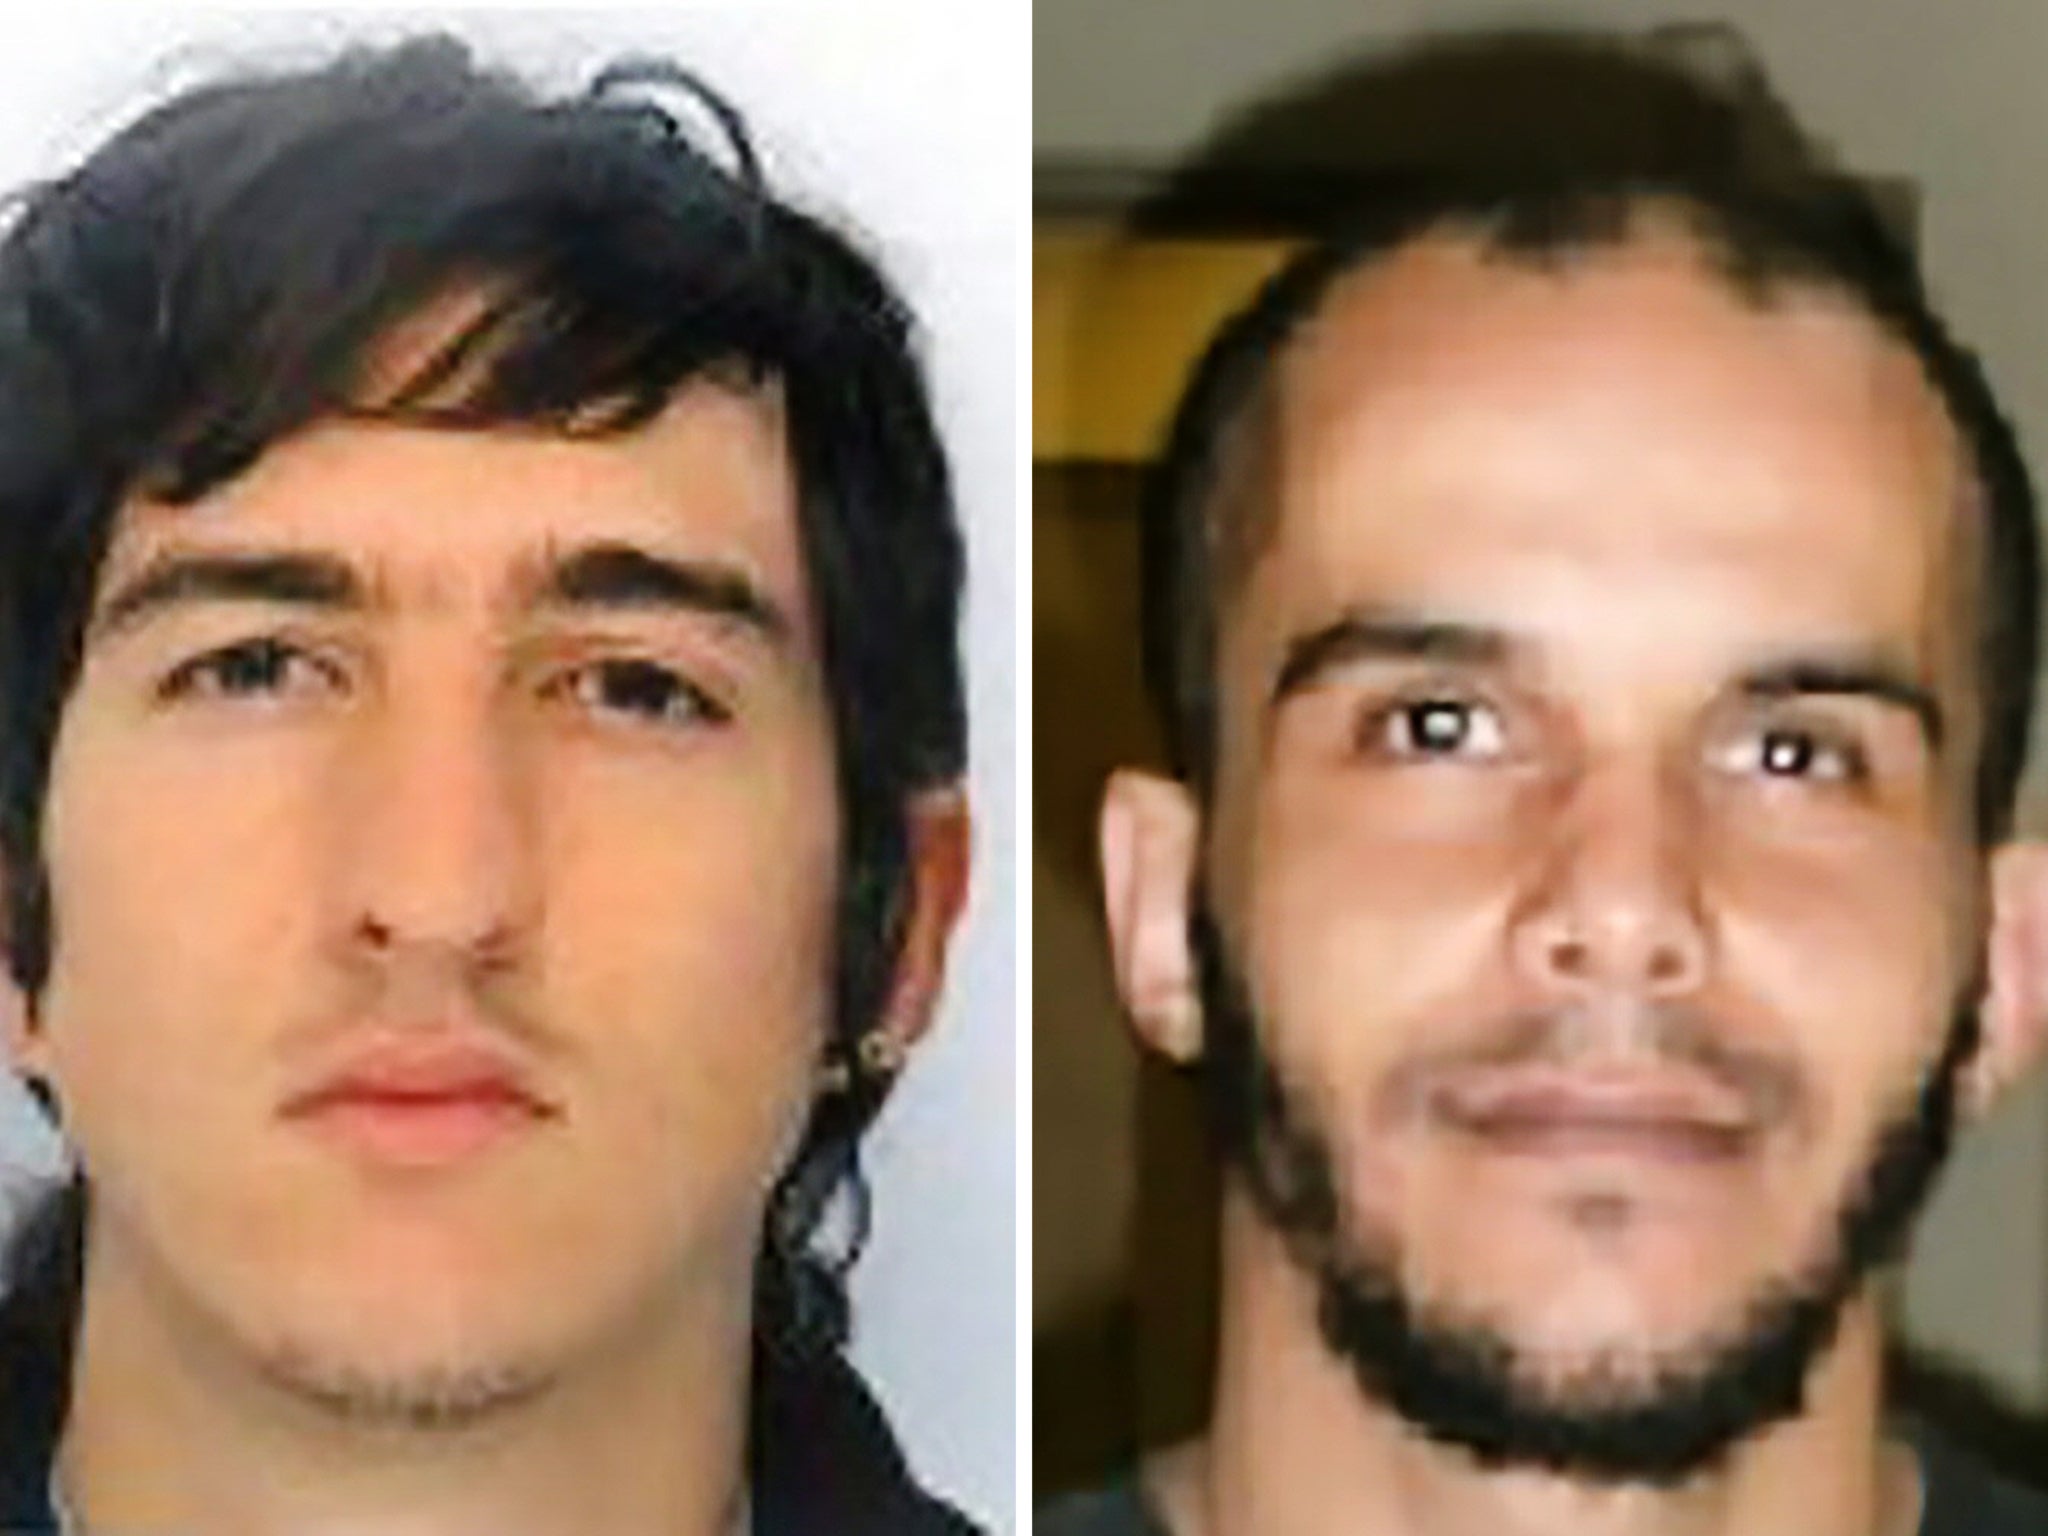 Police released photos of Clement B, left, and Mahiedine M after the raid